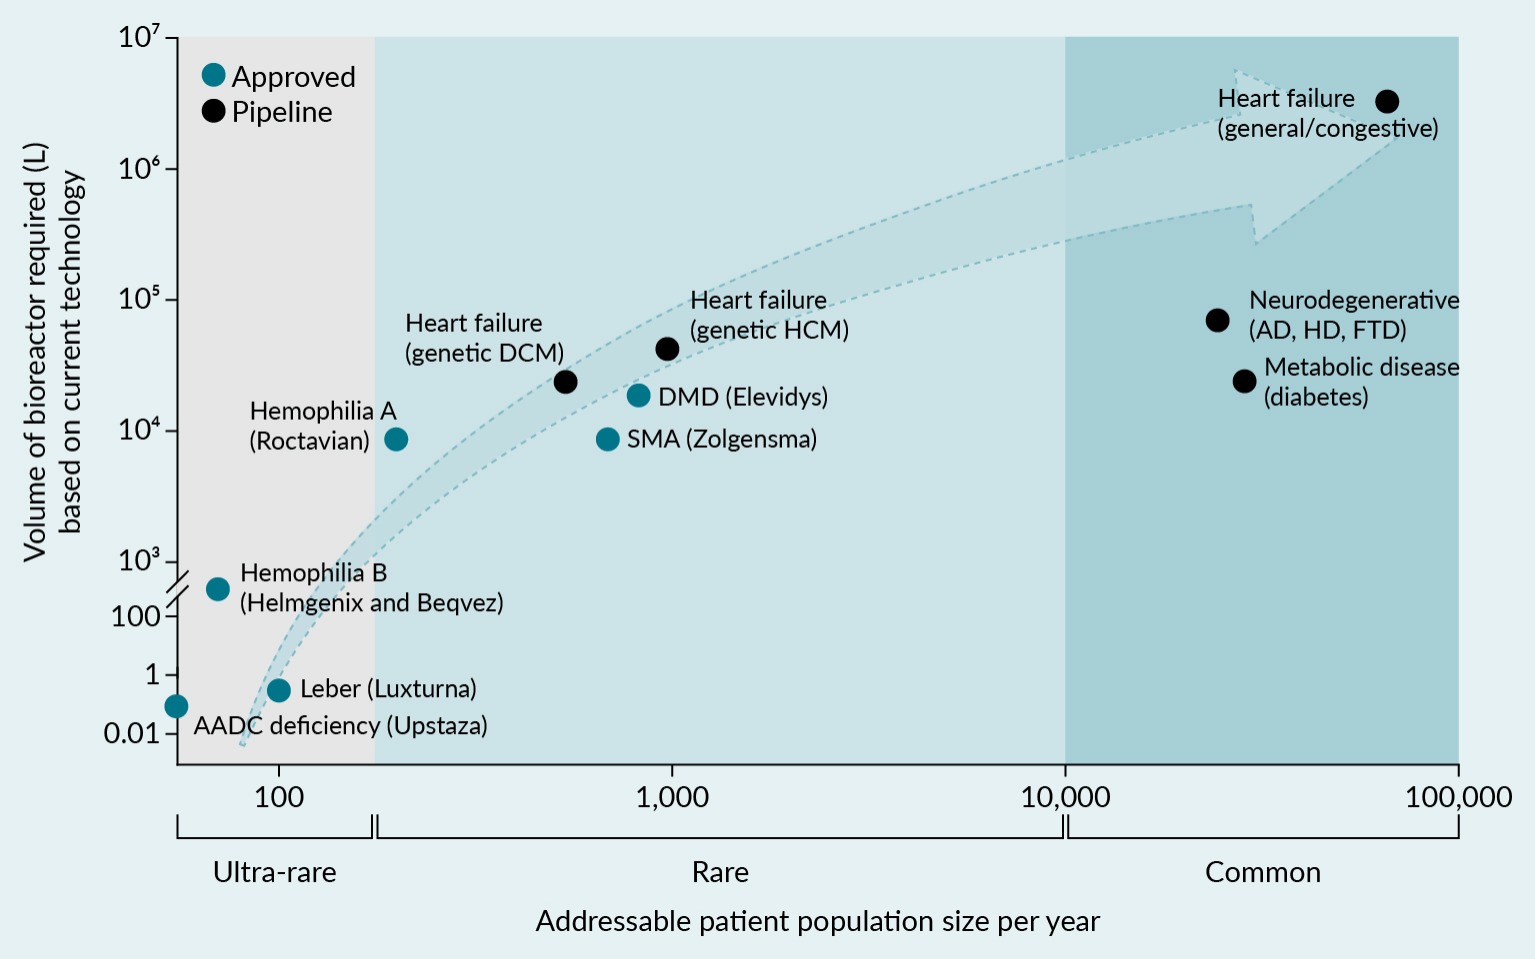 Volume of bioreactor needed to treat patient populations per year for either approved or pipeline AAV gene therapy programs per indication. The bioreactor capacity was calculated based on the current industry standard (average yield of 3 x 1014 vg/L and a 25% recovery). The estimated yearly number of patients included those in the USA, Canada, EU5, and Australia. The vector needed for systemic dosing was calculated based on the average weight of 75 kg for adult patients, 18 kg for 5-year-old patients receiving Elevidys, and 12 kg for 2-year-old patients receiving Zolgensma. The calculations also assume a market penetration or drug adoption of 25% for genetic heart failure (dilated cardiomyopathy [DCM] and hypertrophic cardiomyopathy [HCM]), 1% for general heart failure, 1% for metabolic diseases (diabetes), and 1% for neurodegenerative diseases (Alzheimer’s disease [AD], Huntington’s disease [HD], and frontotemporal dementia [FTD] combined).